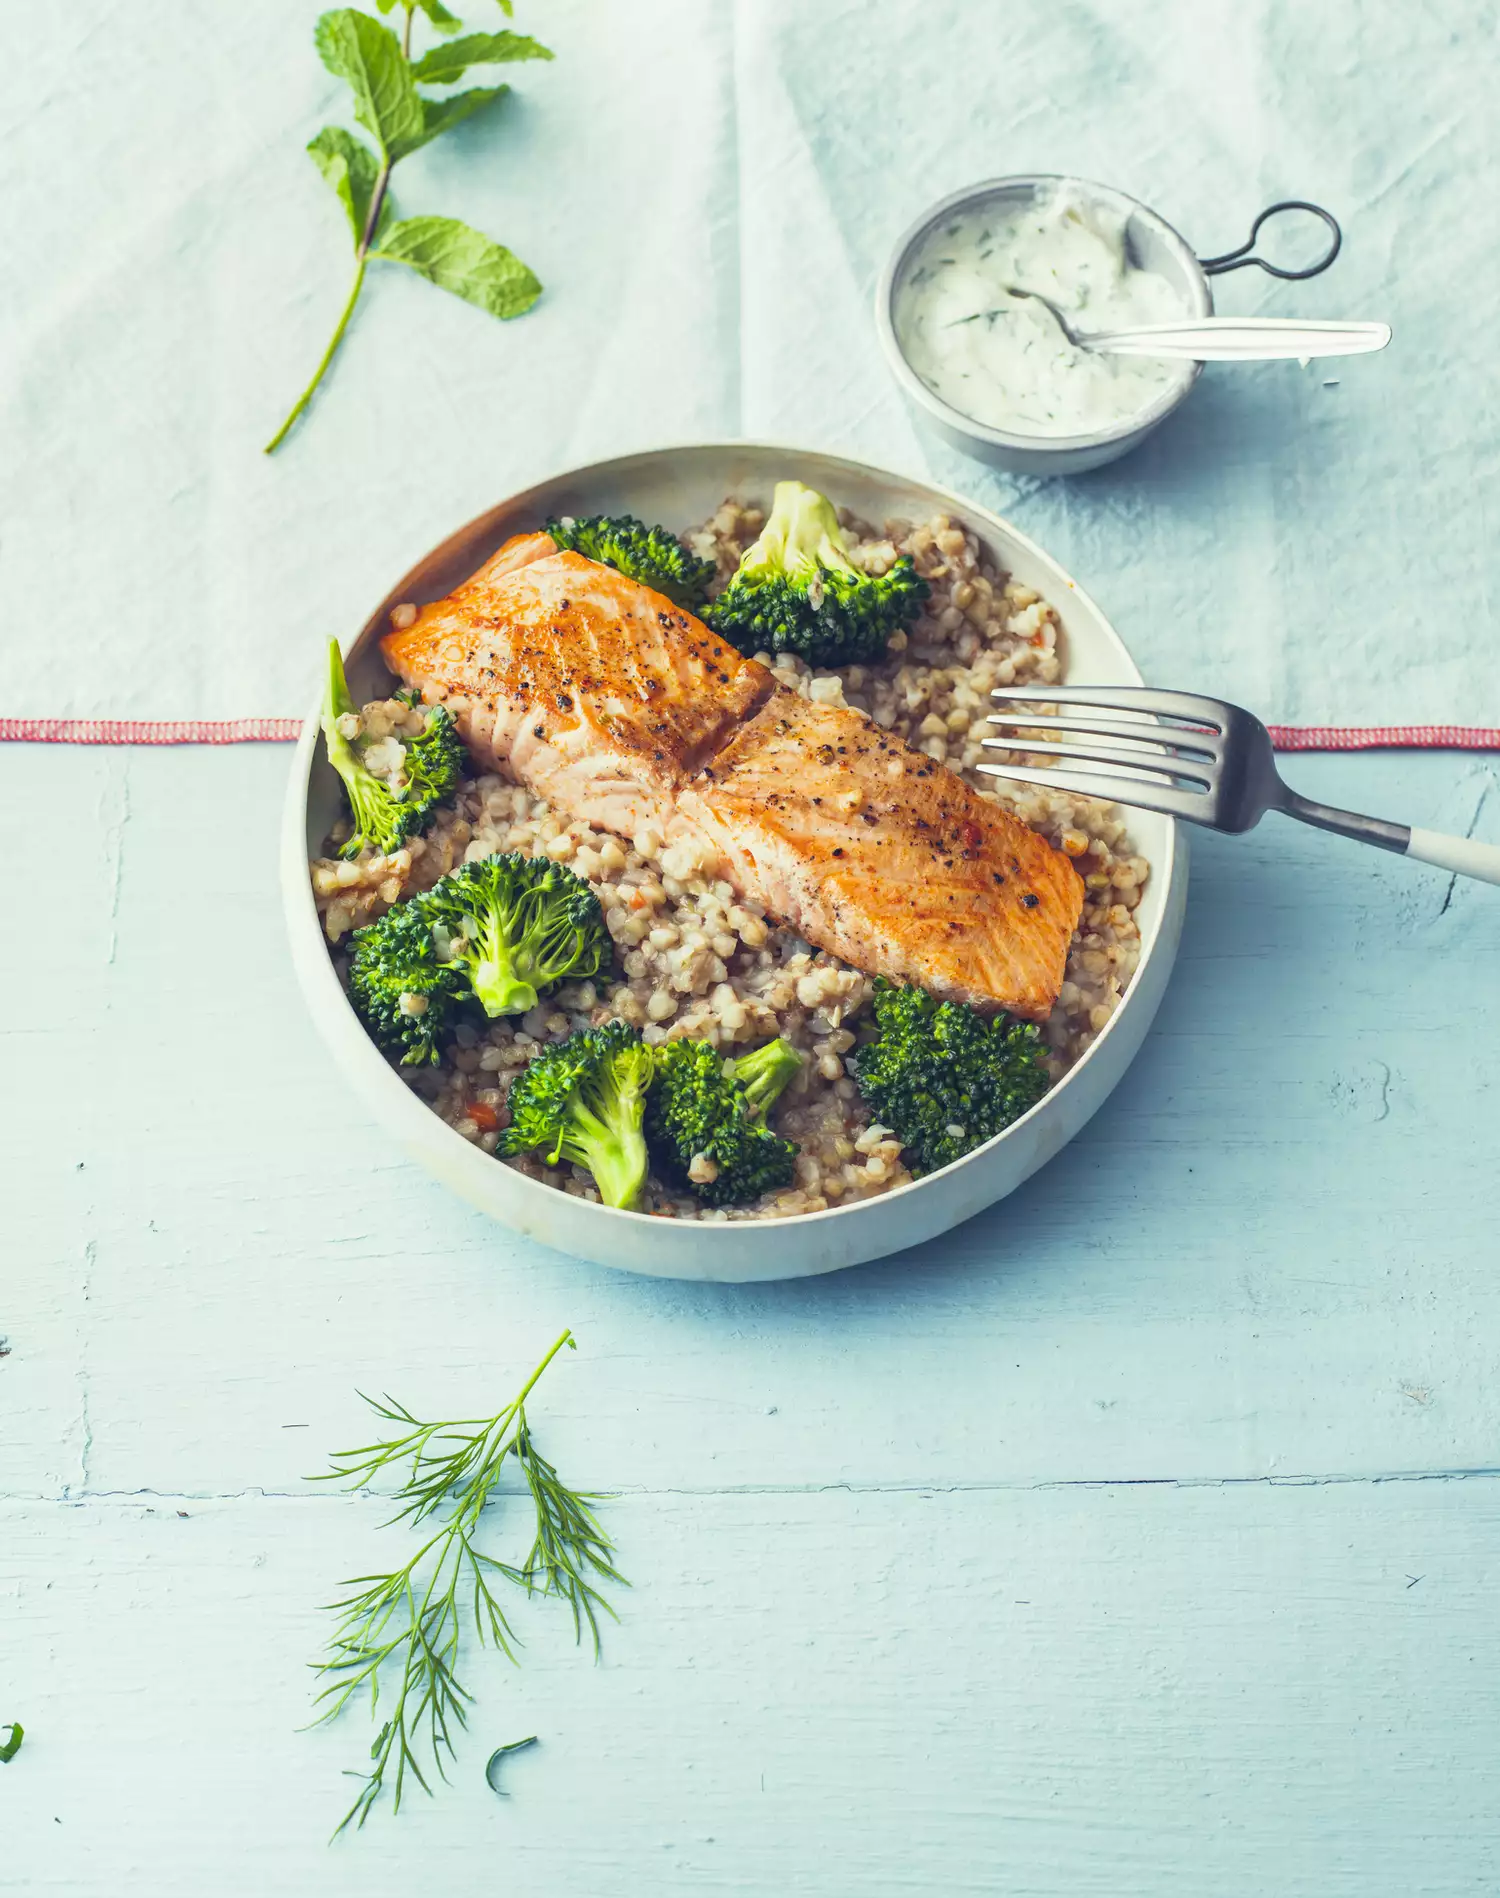 salmon with buckwheat pilaf and broccoli in a bowl